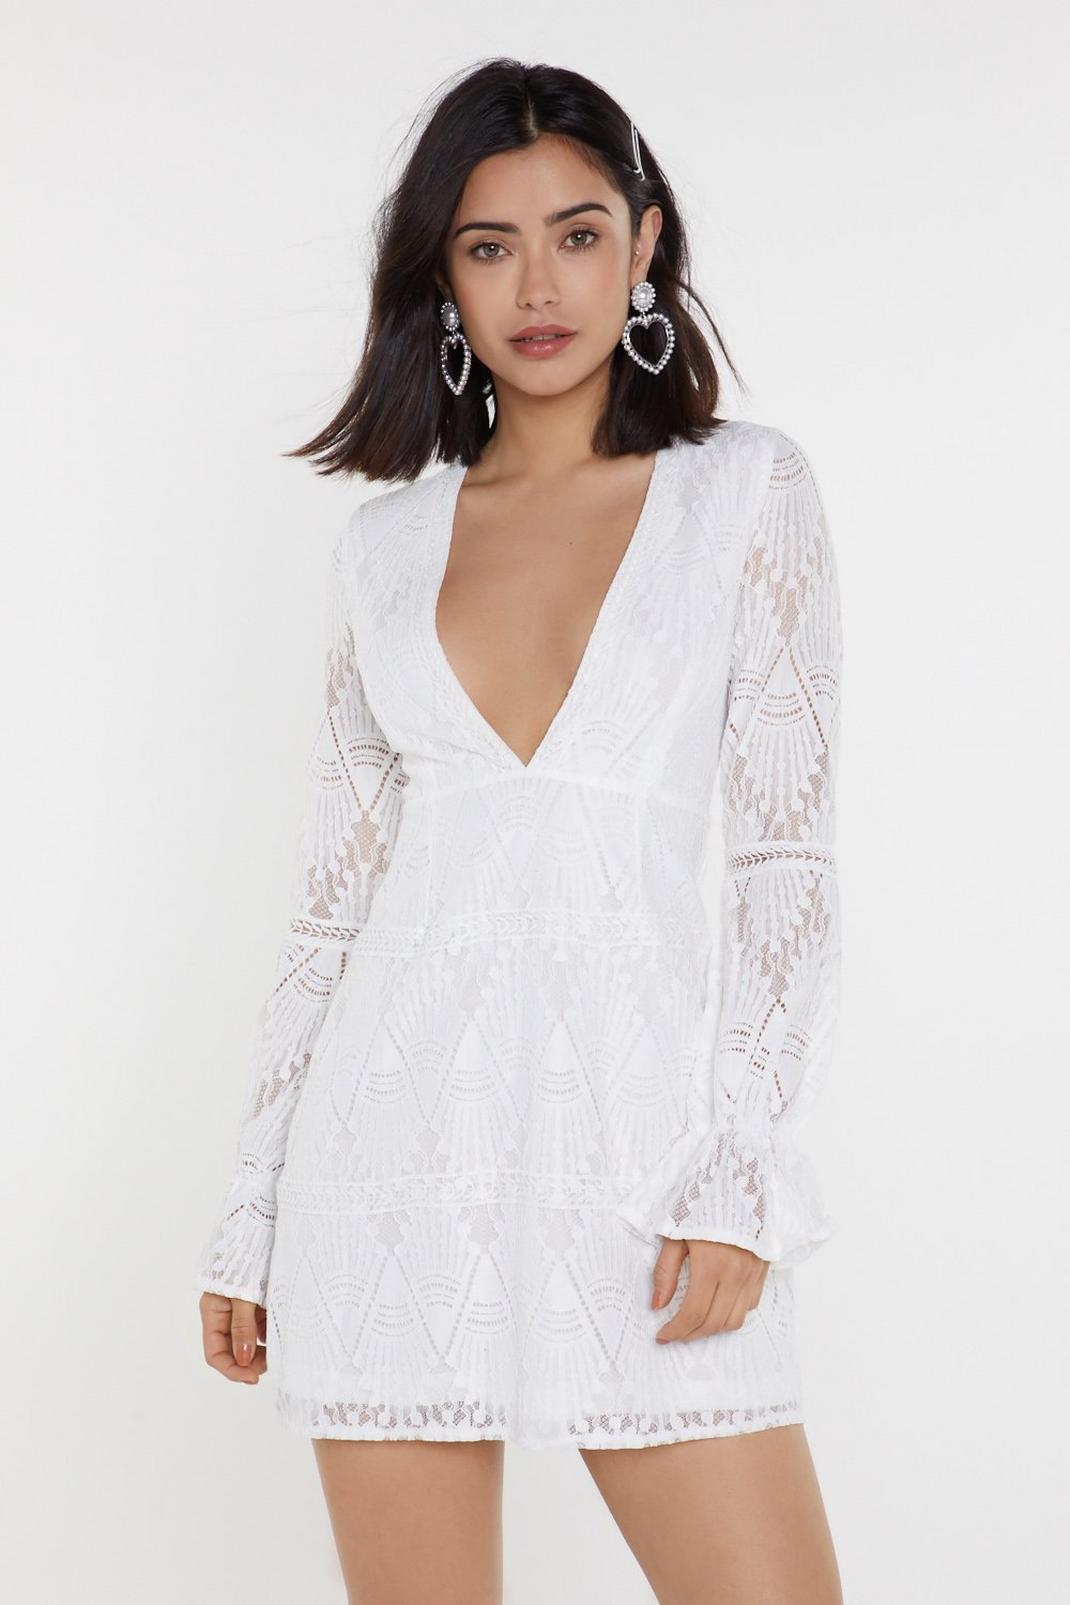 Have the Lace Laugh Plunging Dress | Nasty Gal